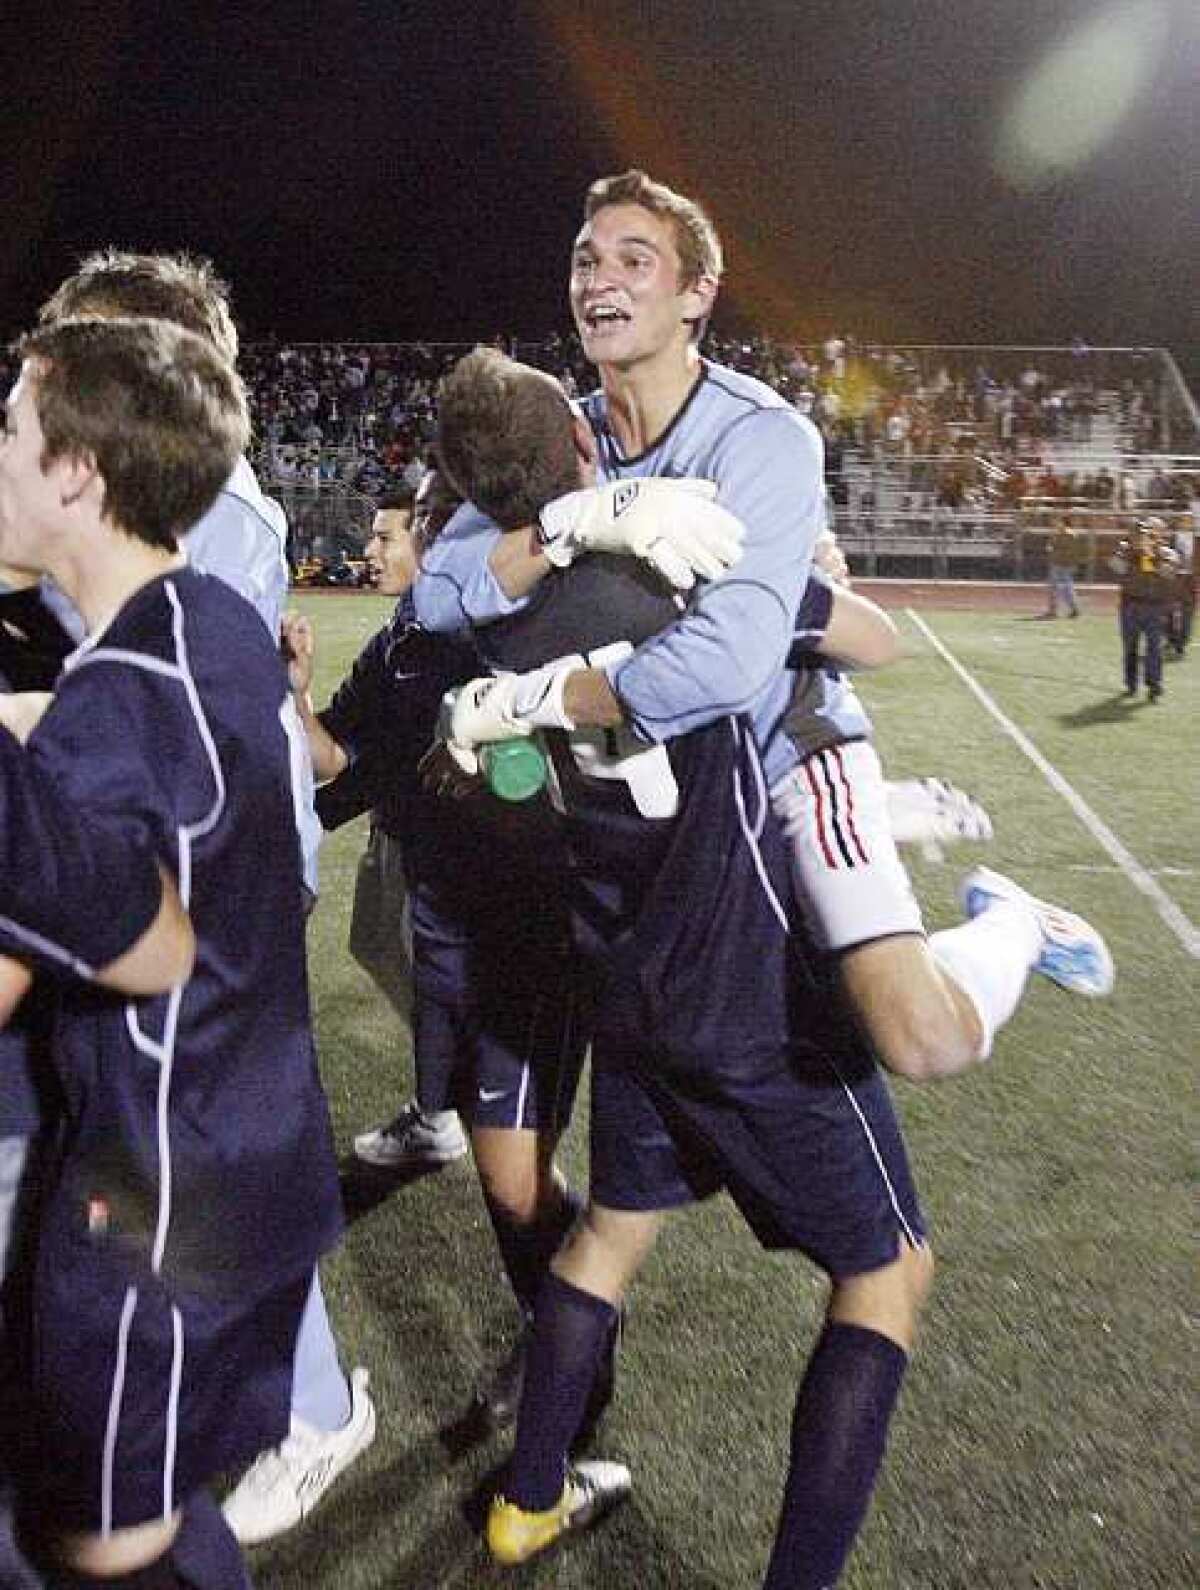 Nick Ruiz helped deliver the Crescenta Valley boys' soccer team a 3-2 win over Salesian in overtime of the CIF Southern Section Division IV quarterfinals.